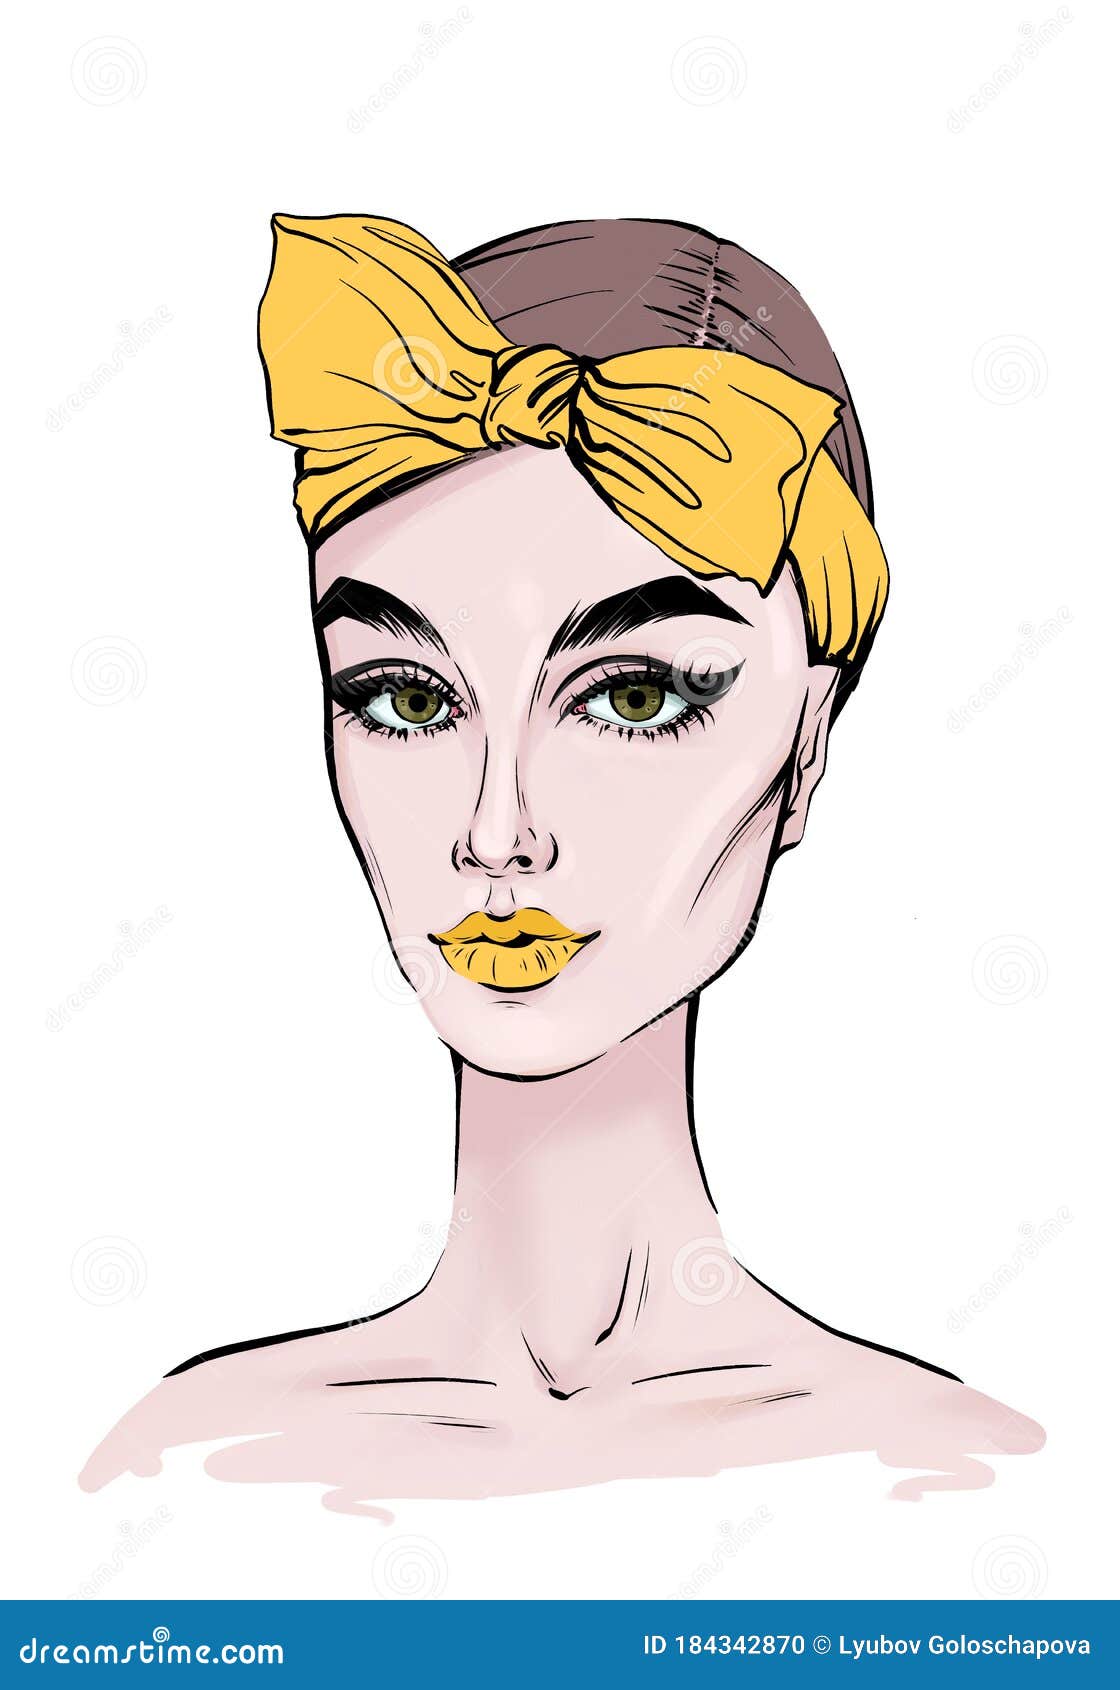 Girl with a fashionable hairstyle fashion Vector Image